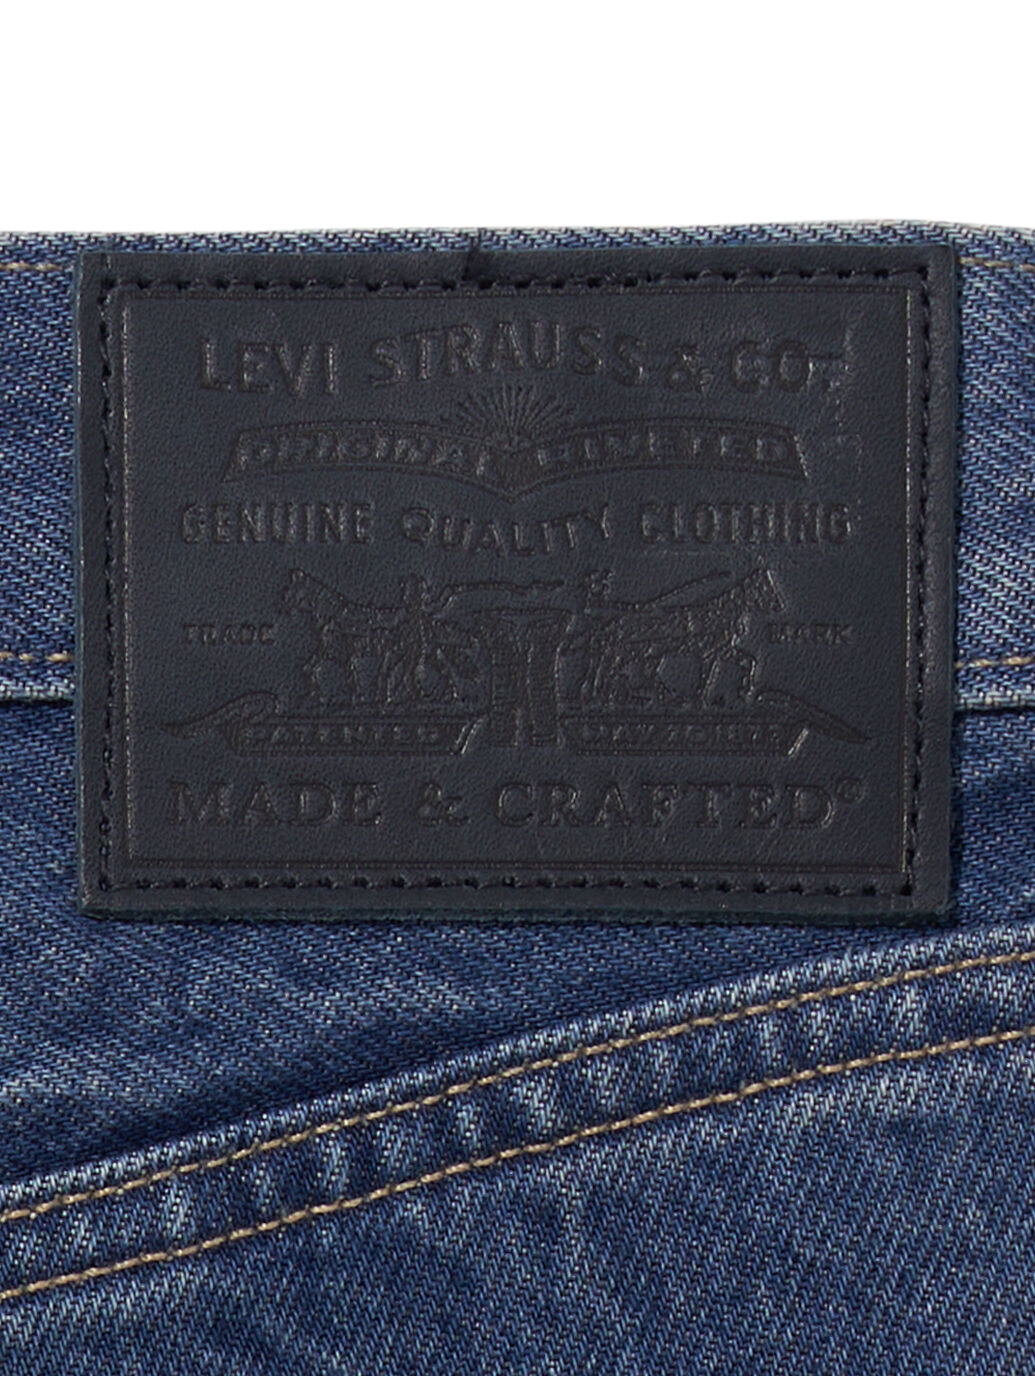 LEVI'S® MADE&CRAFTED®ワイド バレルジーンズ｜リーバイス® 公式通販